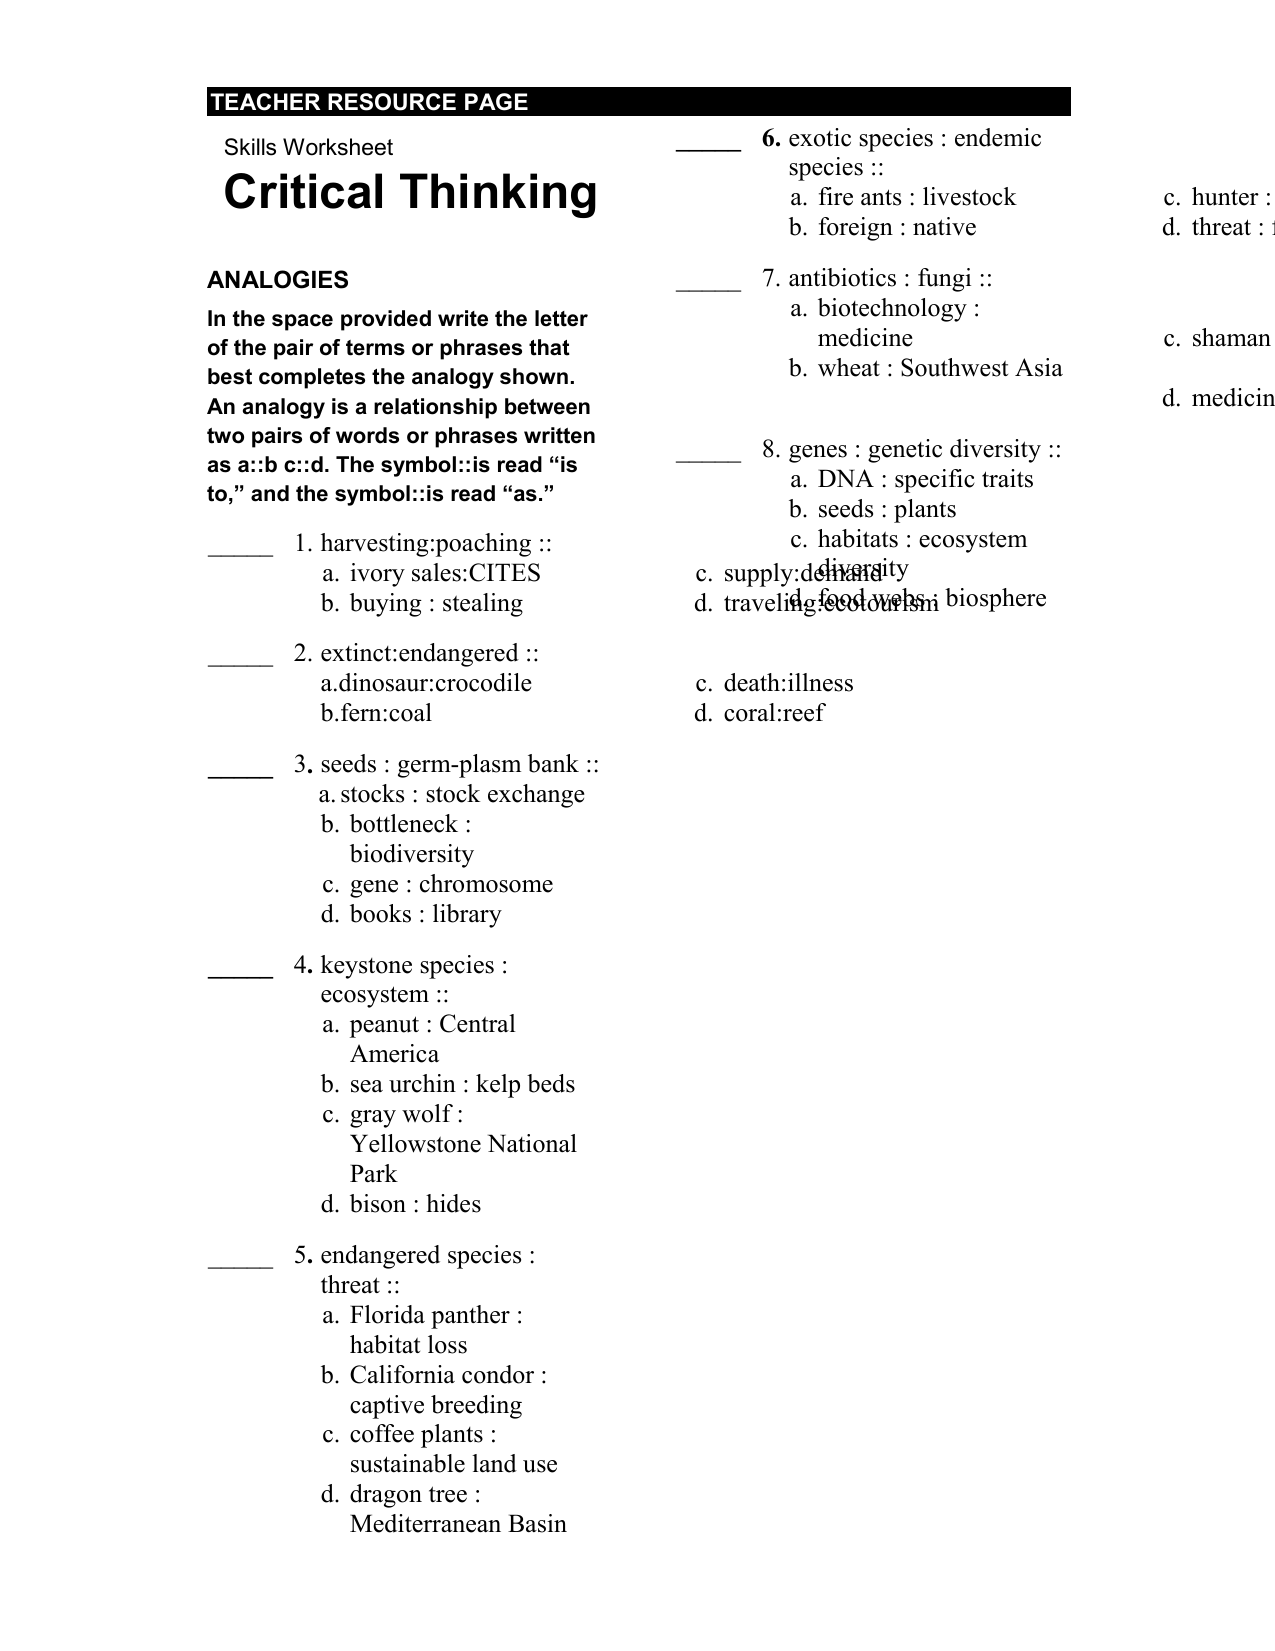 Document Intended For Skills Worksheet Critical Thinking Analogies